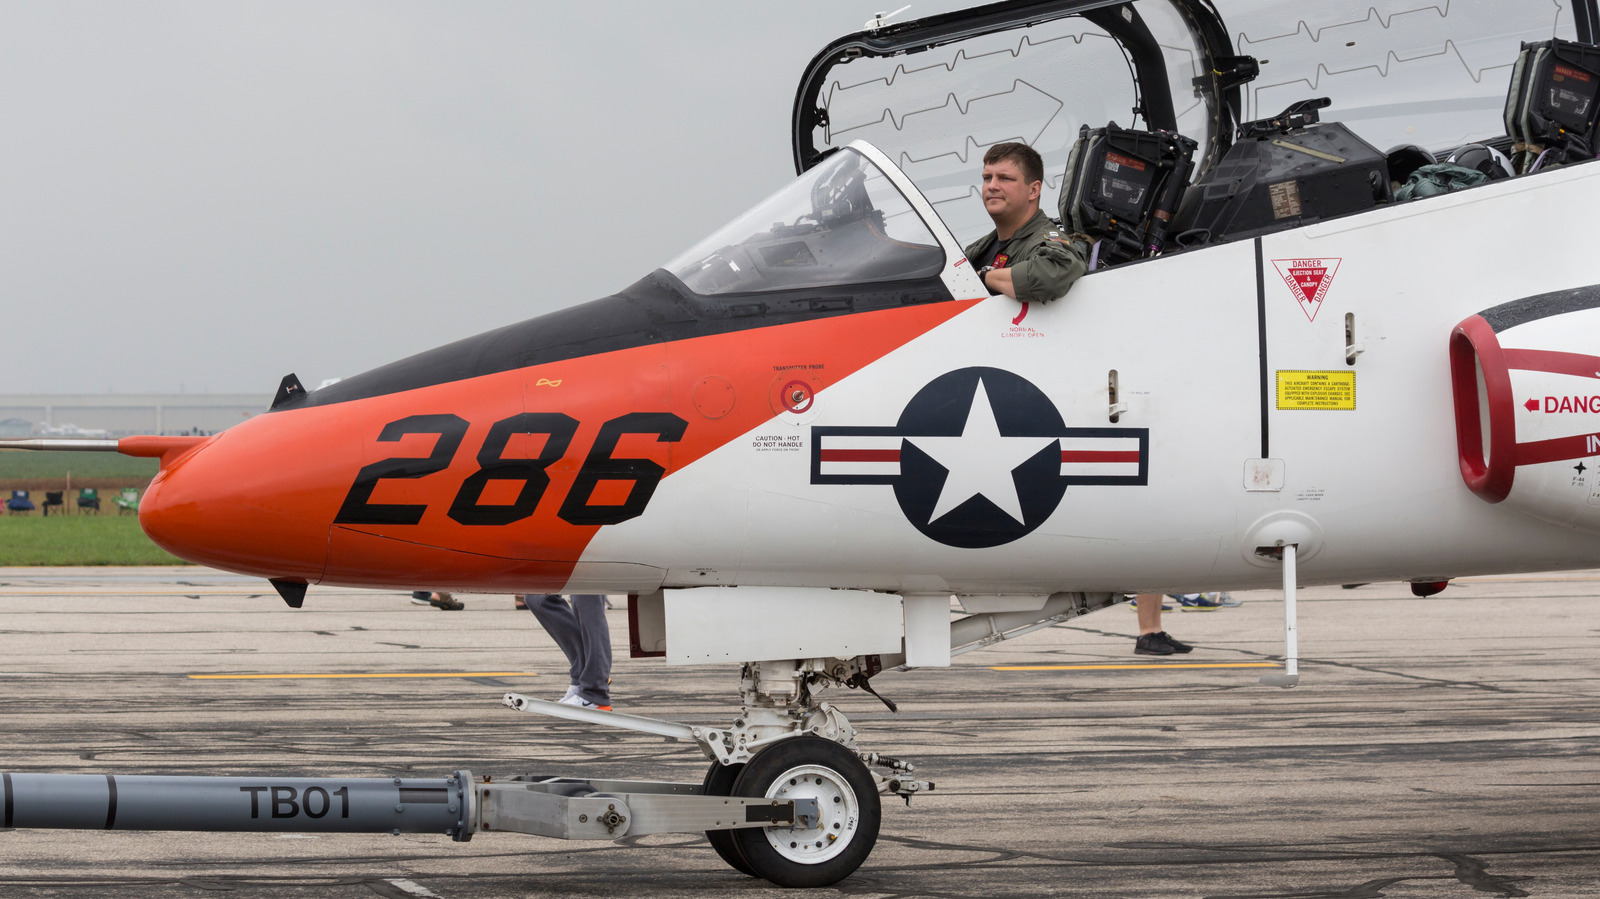 Navy grounds T-45C trainer aircraft over safety concerns 